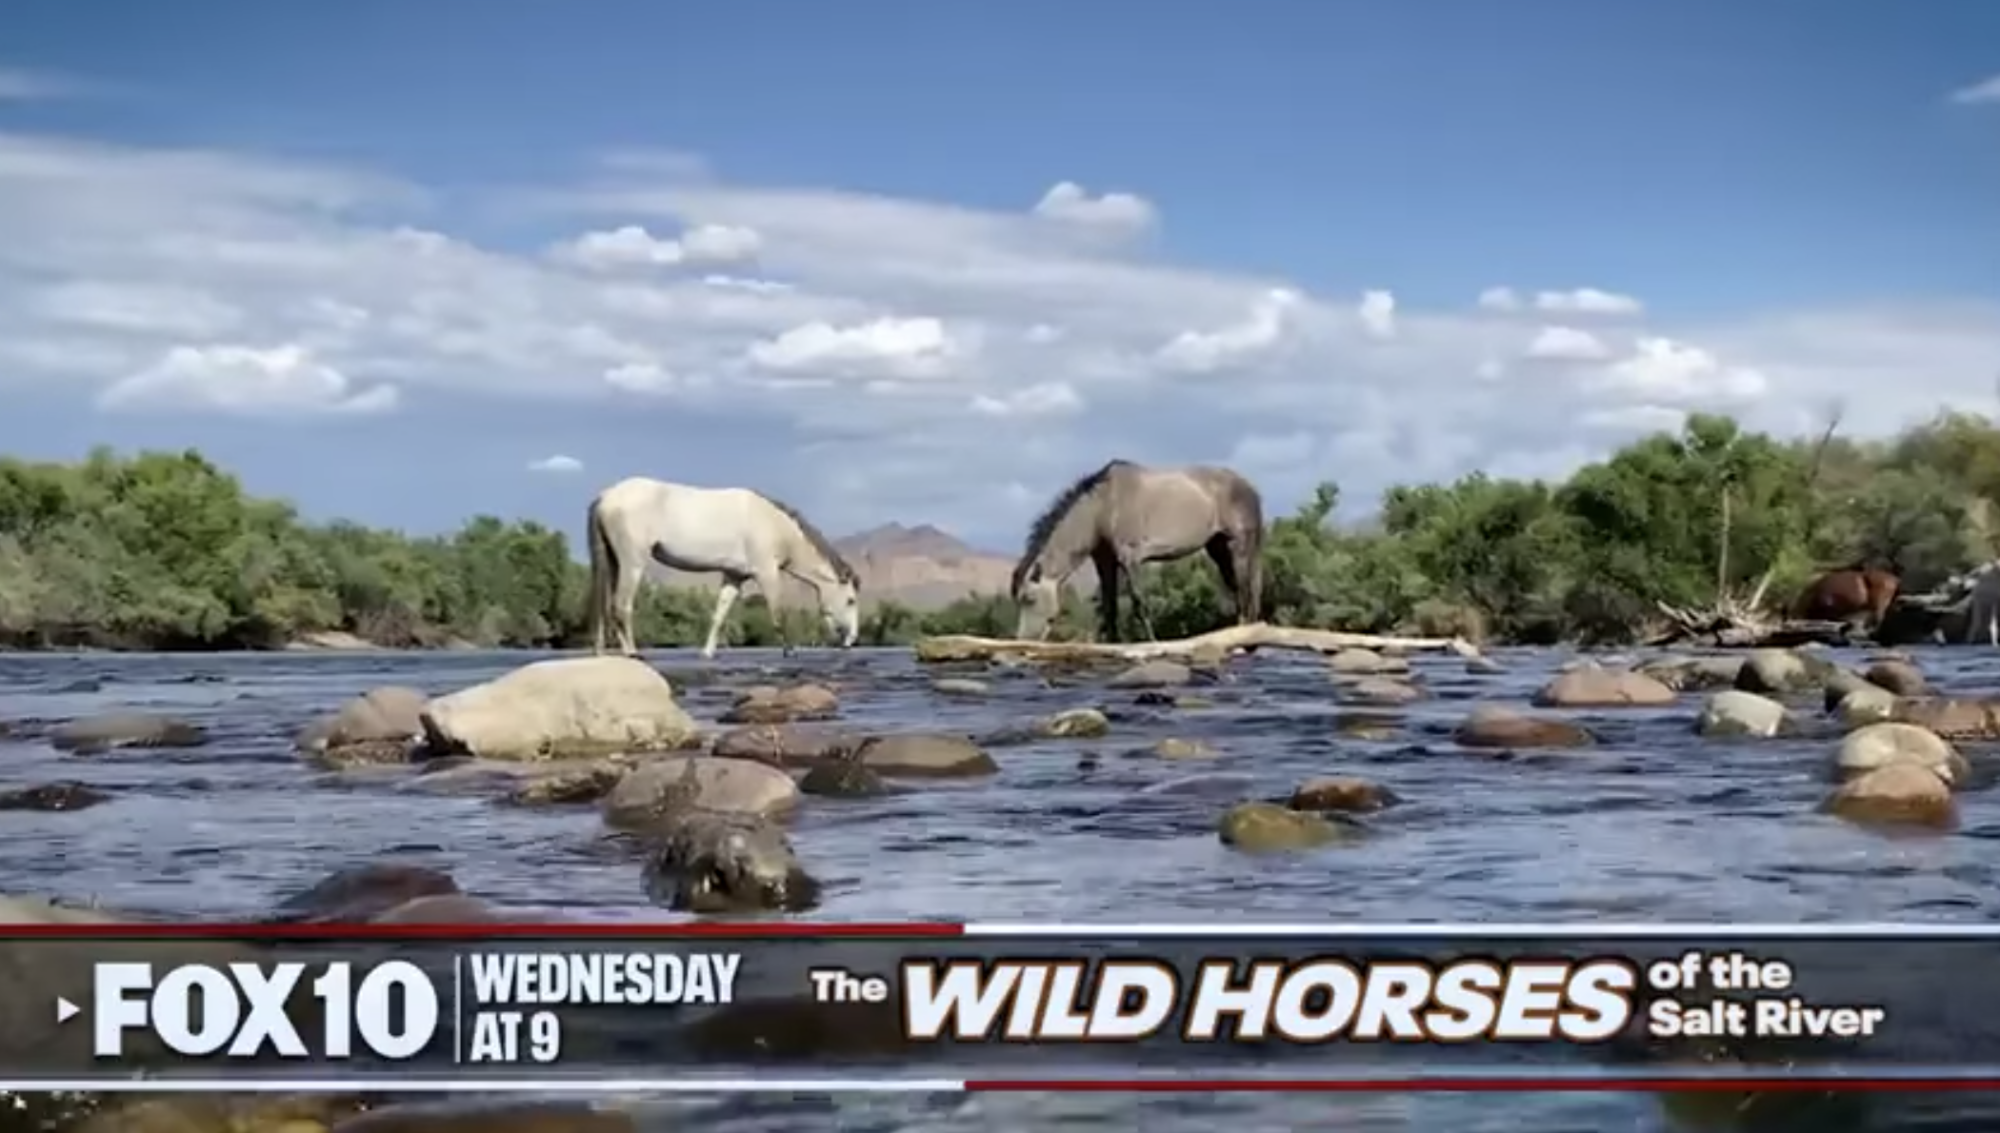 Coming up! A news piece that highlights our life’s work: the humane management of the Salt River wild horses.